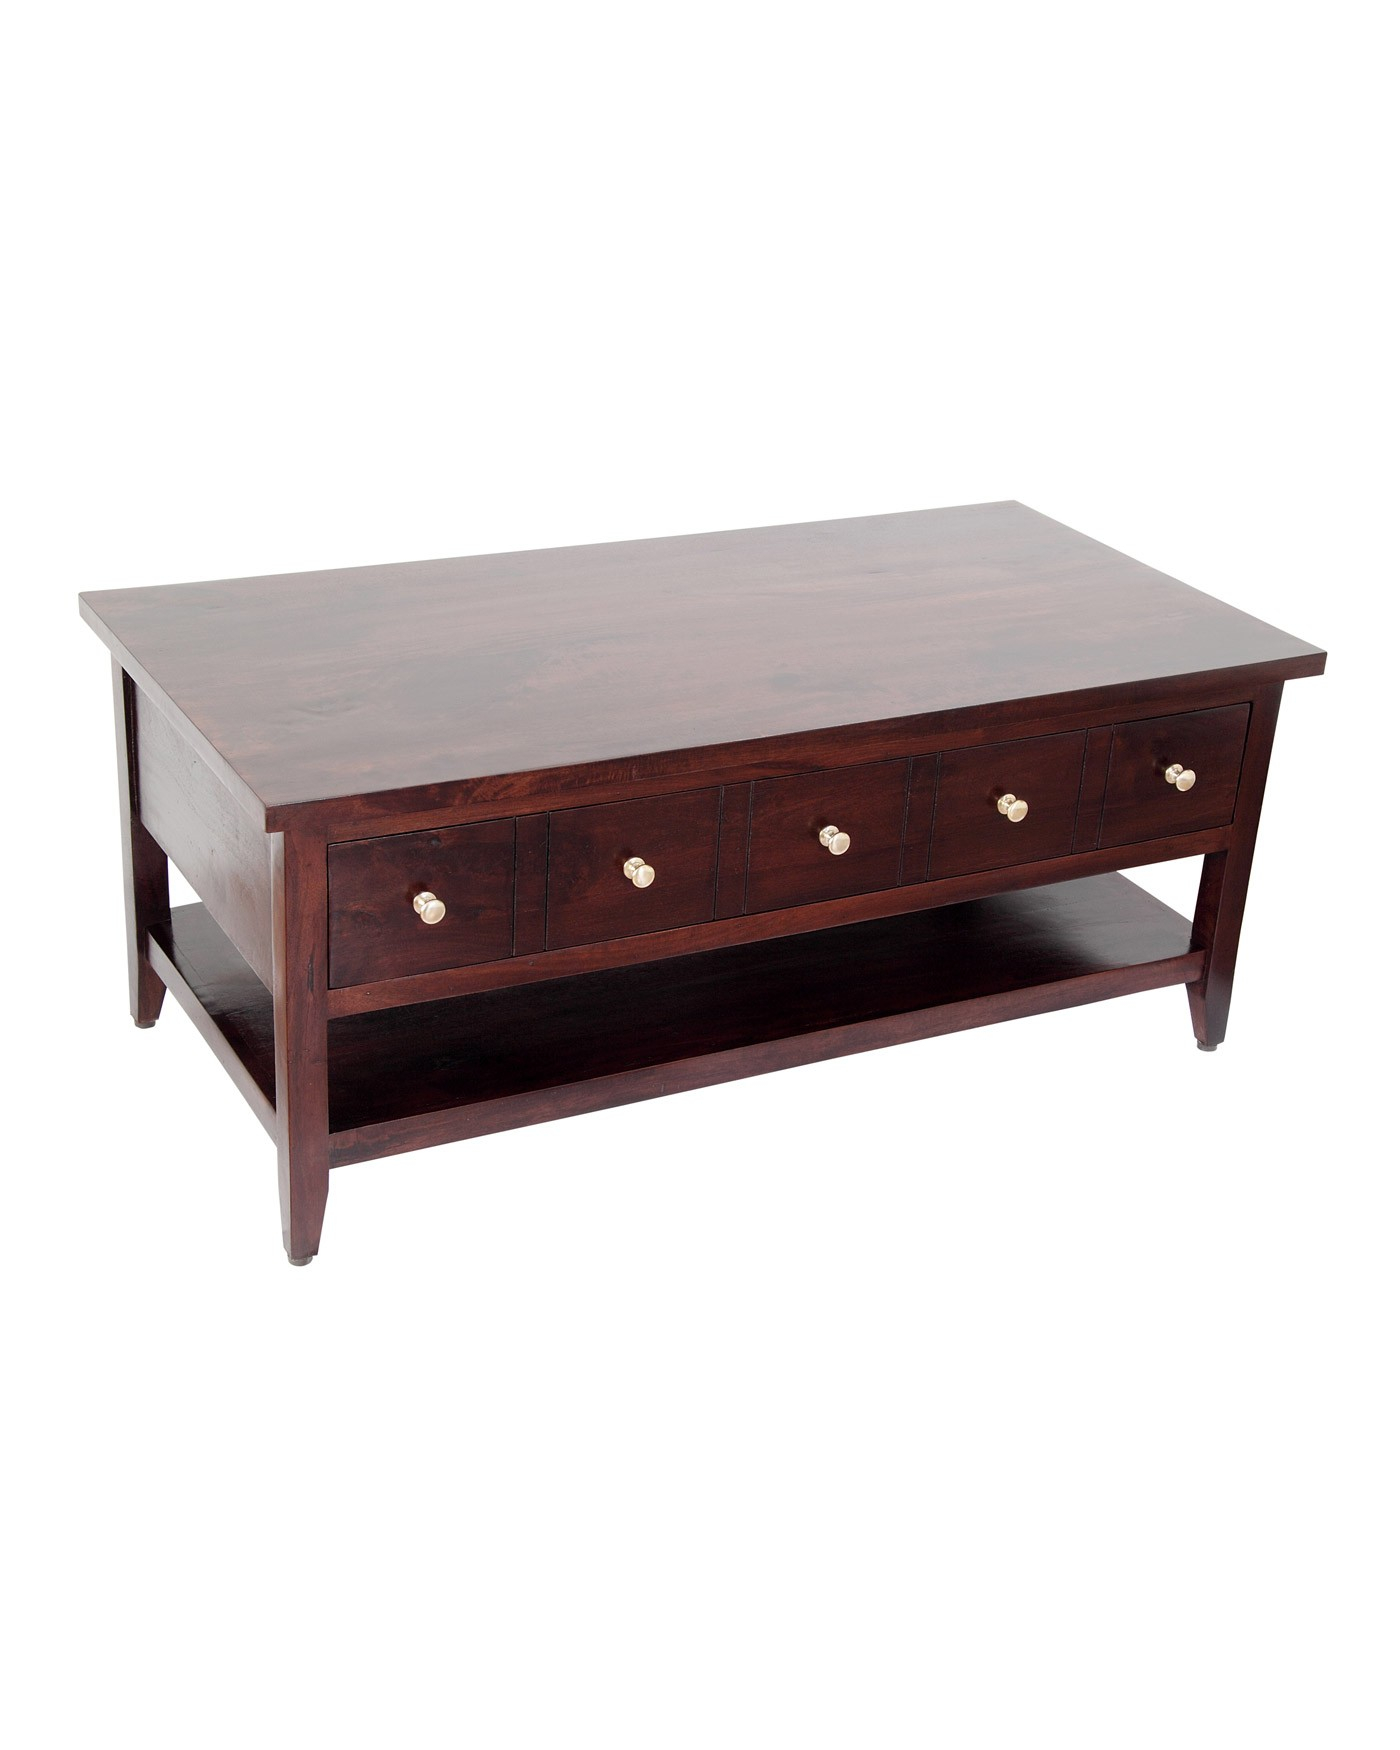 Groove Solid Mango Wood Coffee Table With Drawers Dark Shade within sizing 1400 X 1750